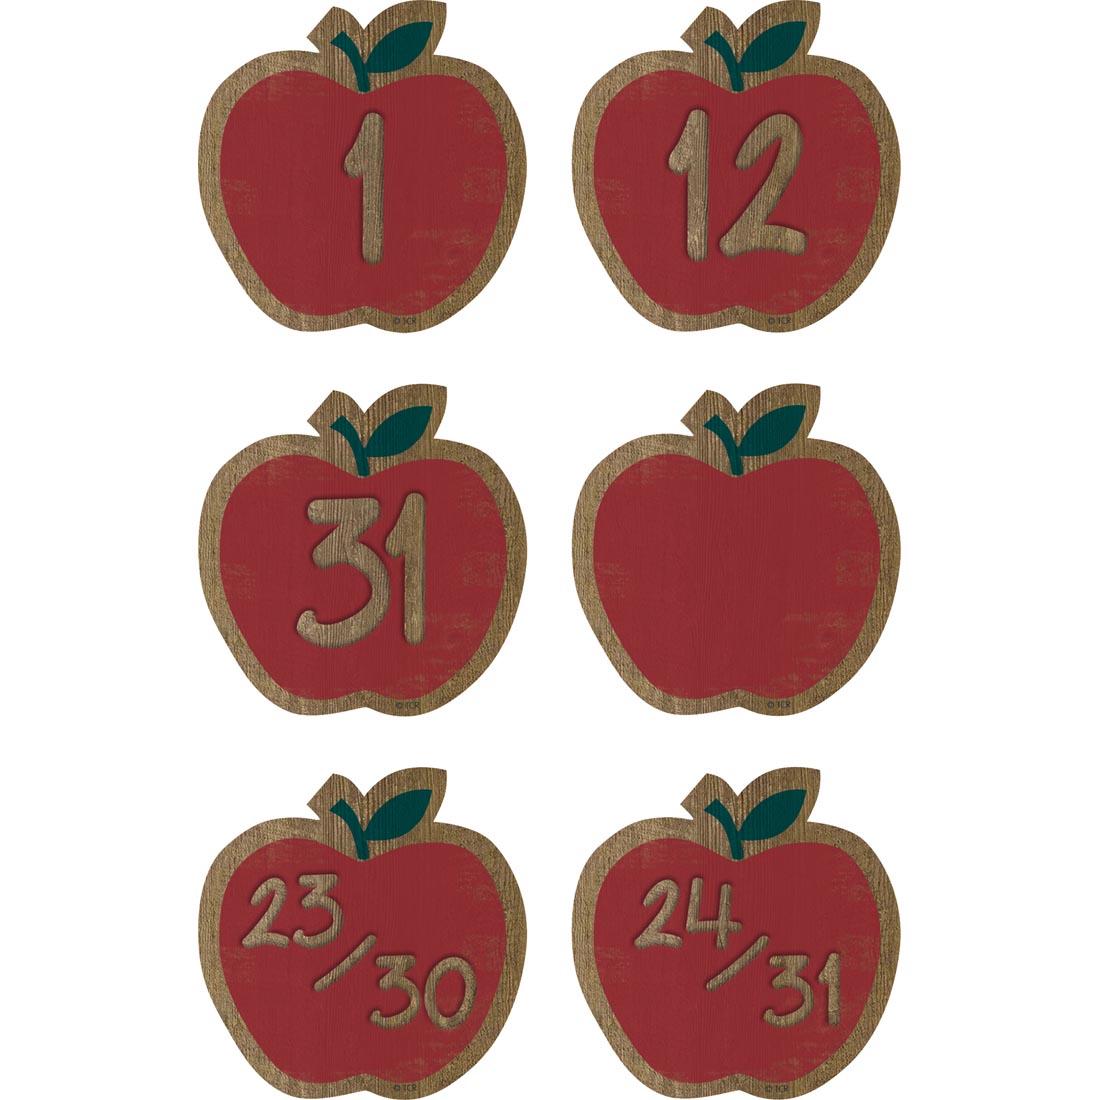 Apples Calendar Days from the Home Sweet Classroom collection by Teacher Created Resources